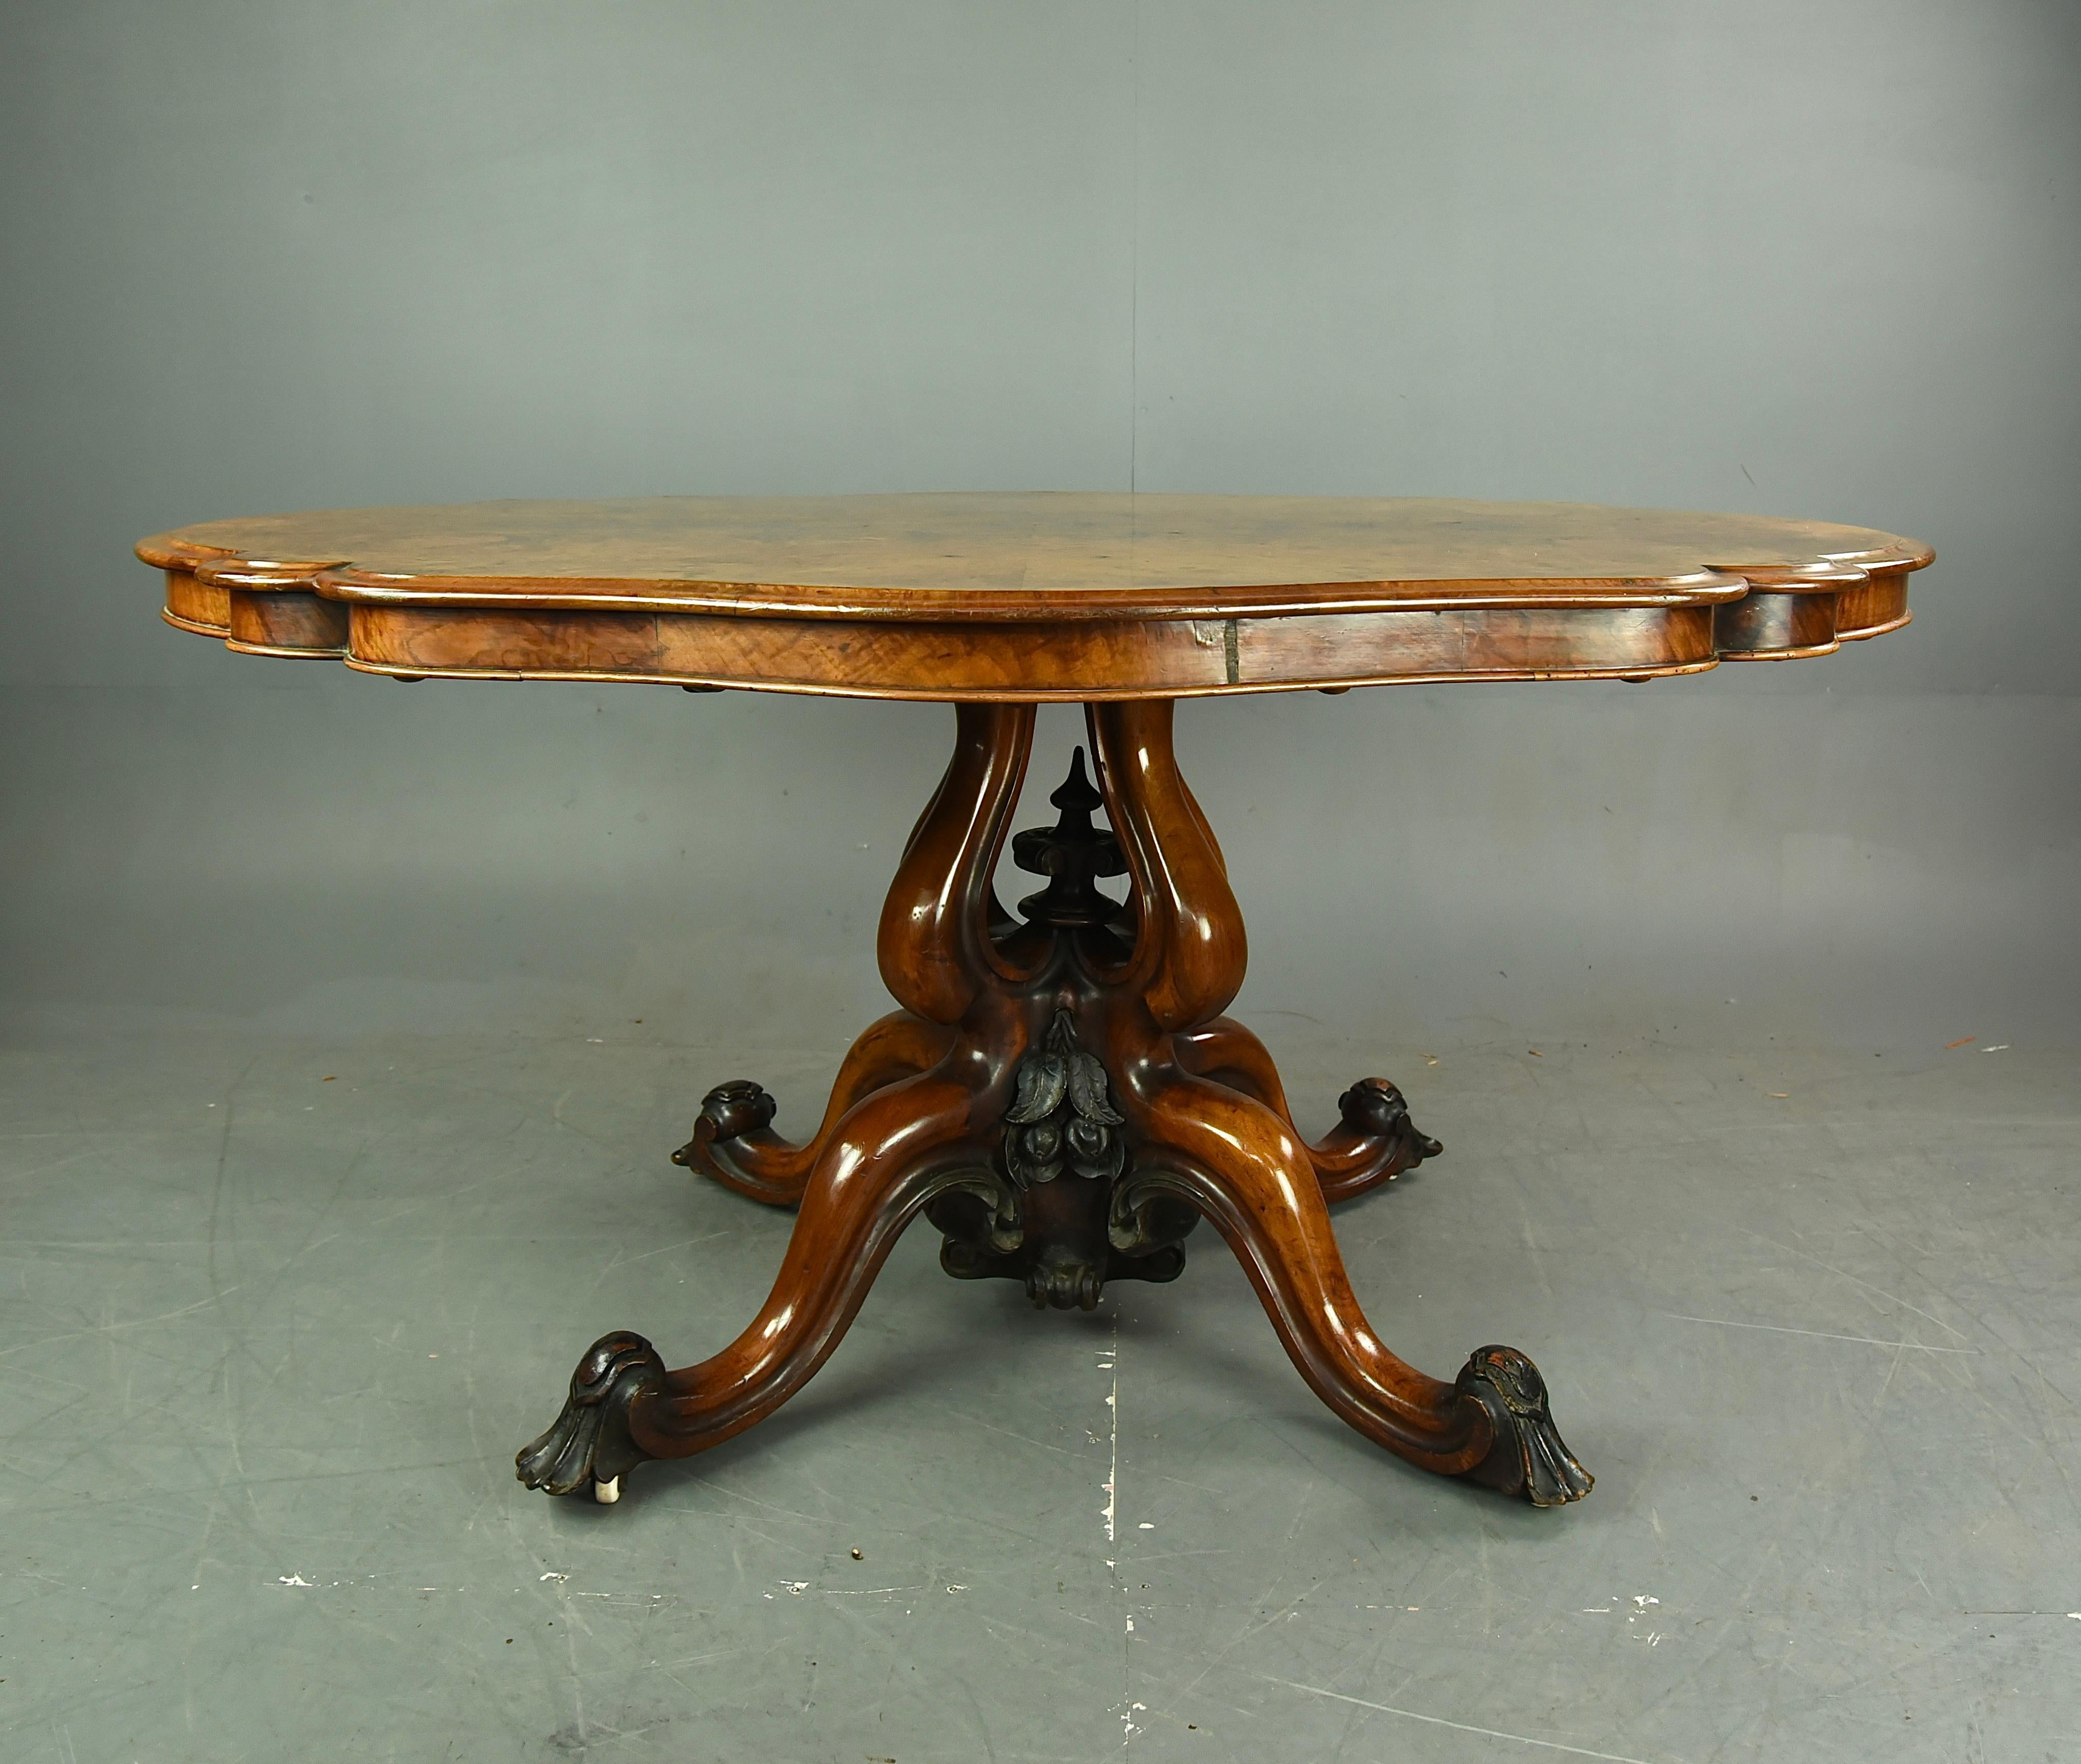 A stunning and top quality large Victorian burr walnut tilt top centre or dining table. The shaped oval top having wonderful book matched burr walnut veneers with a thumb moulded edge. The superb base supported on a quatrefoil pierced column with